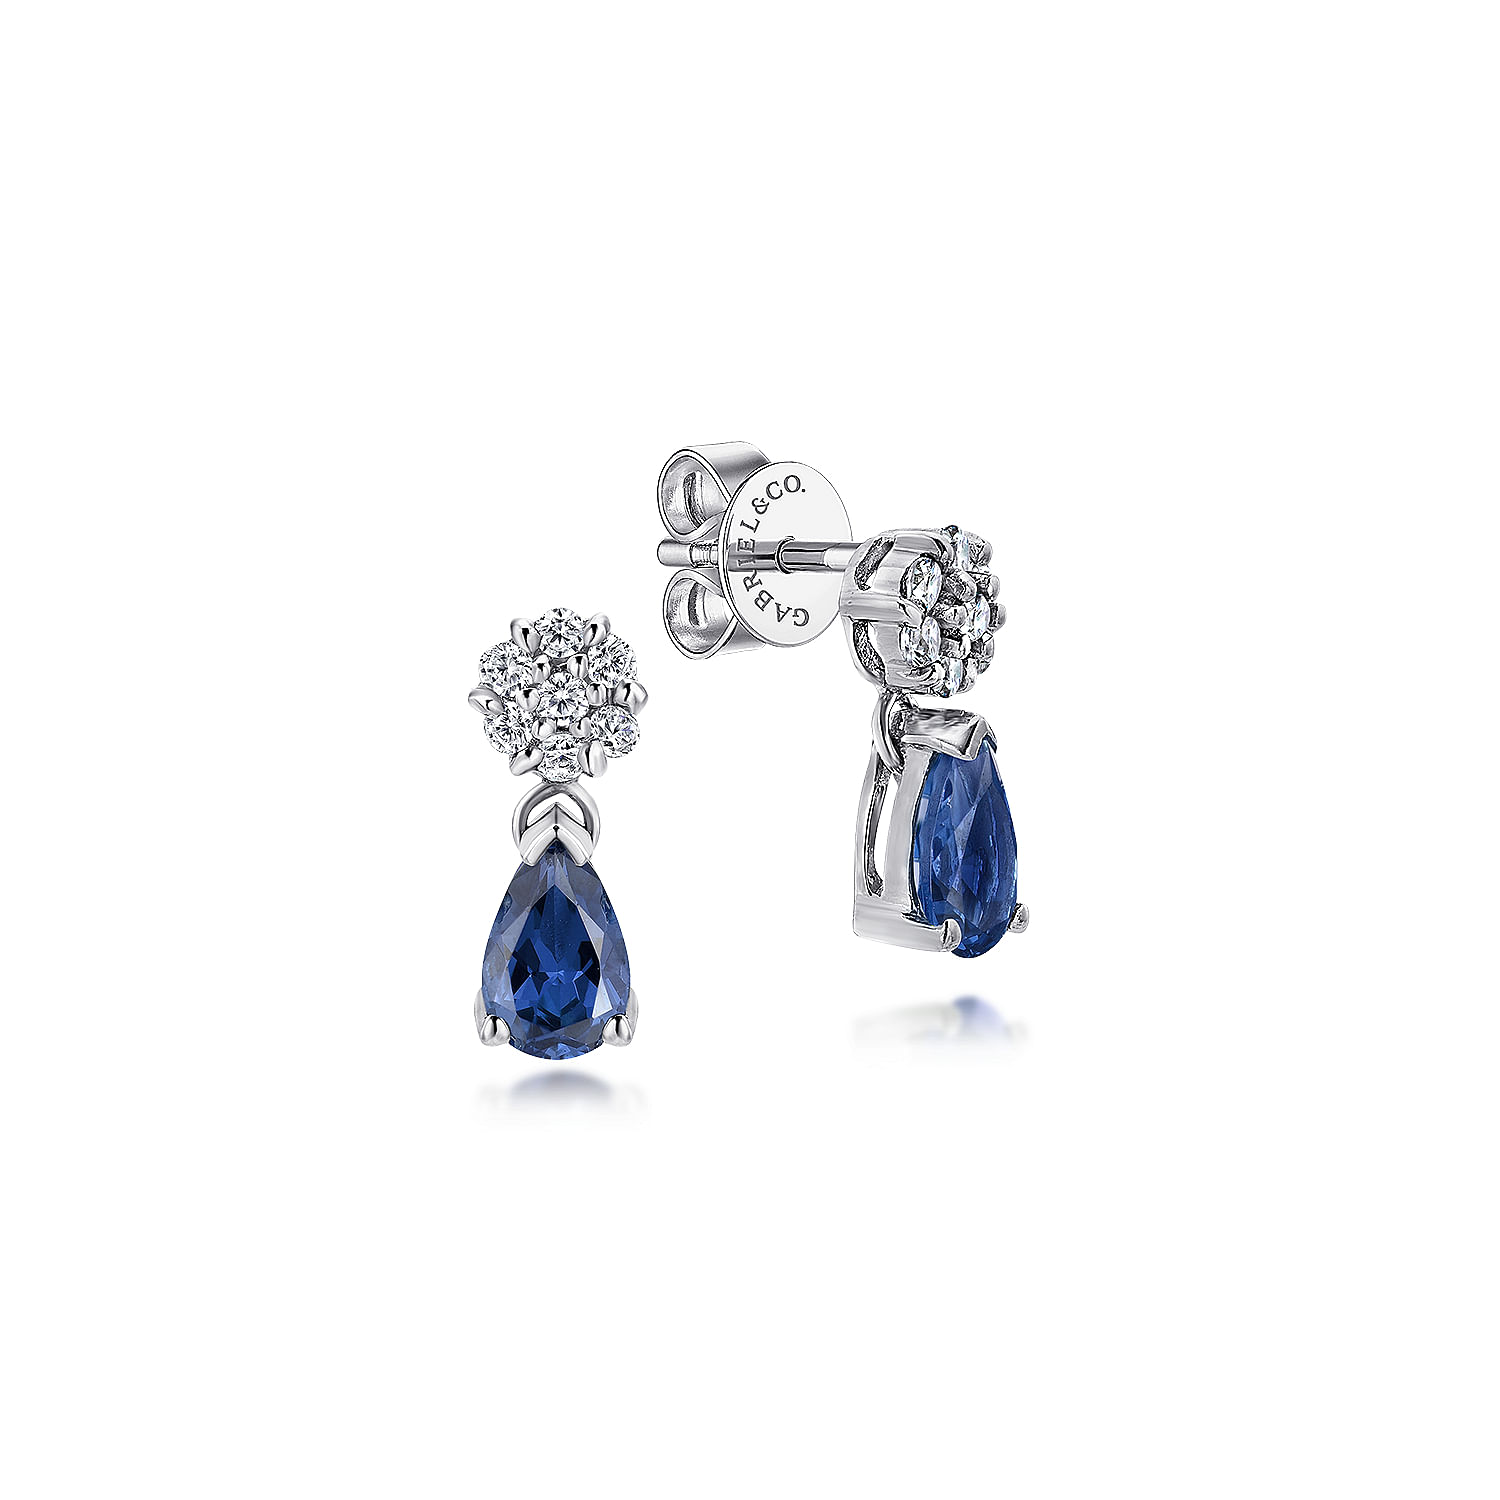 14K White Gold Floral Diamond Stud Earrings with Pear Shaped Sapphire Drops